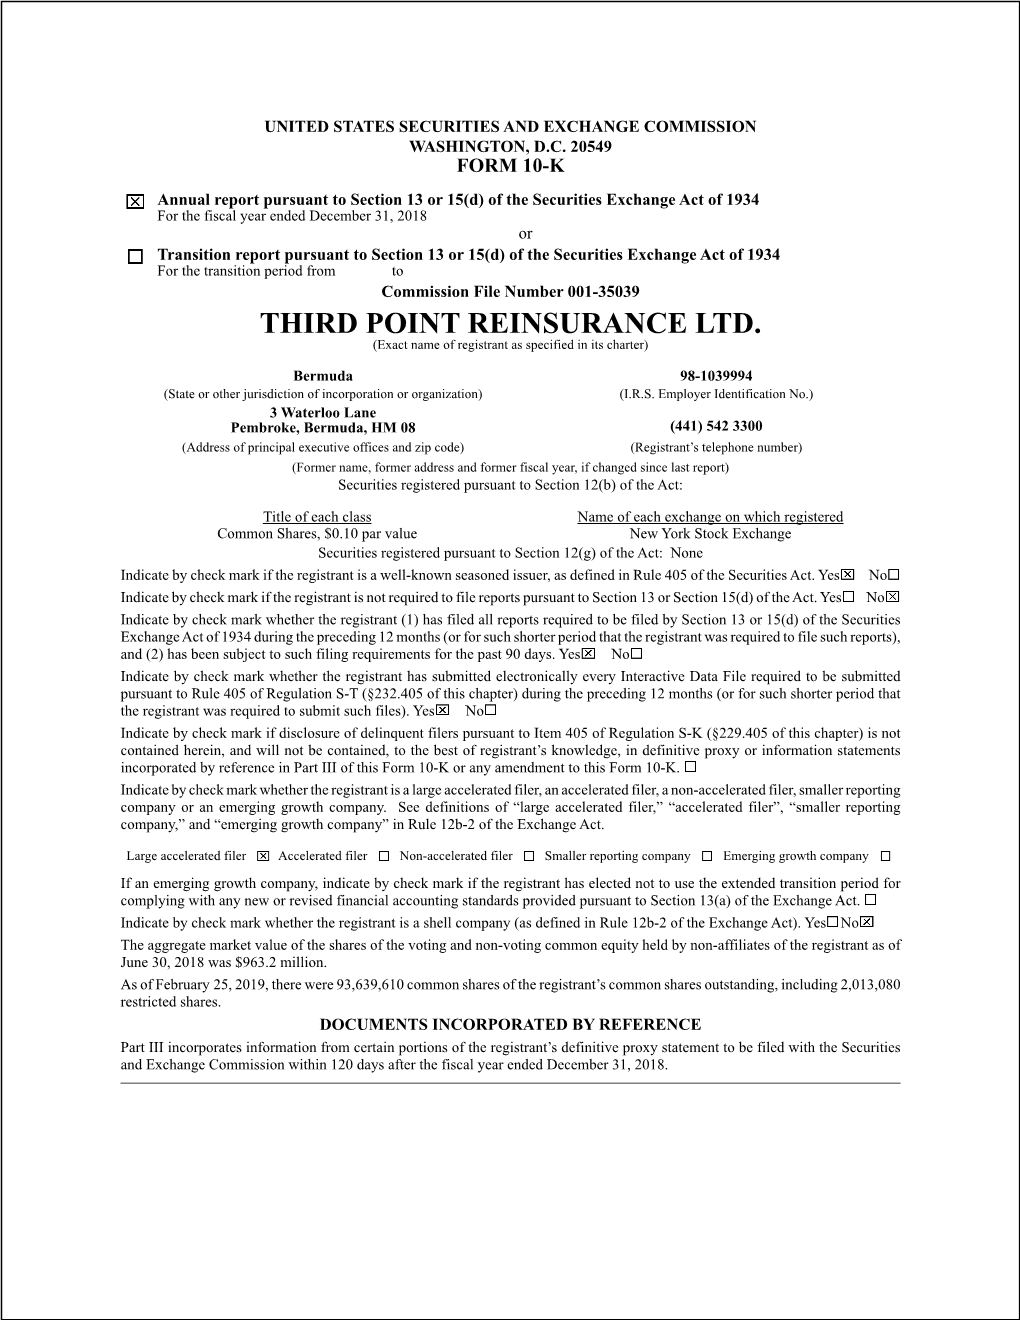 THIRD POINT REINSURANCE LTD. (Exact Name of Registrant As Specified in Its Charter)